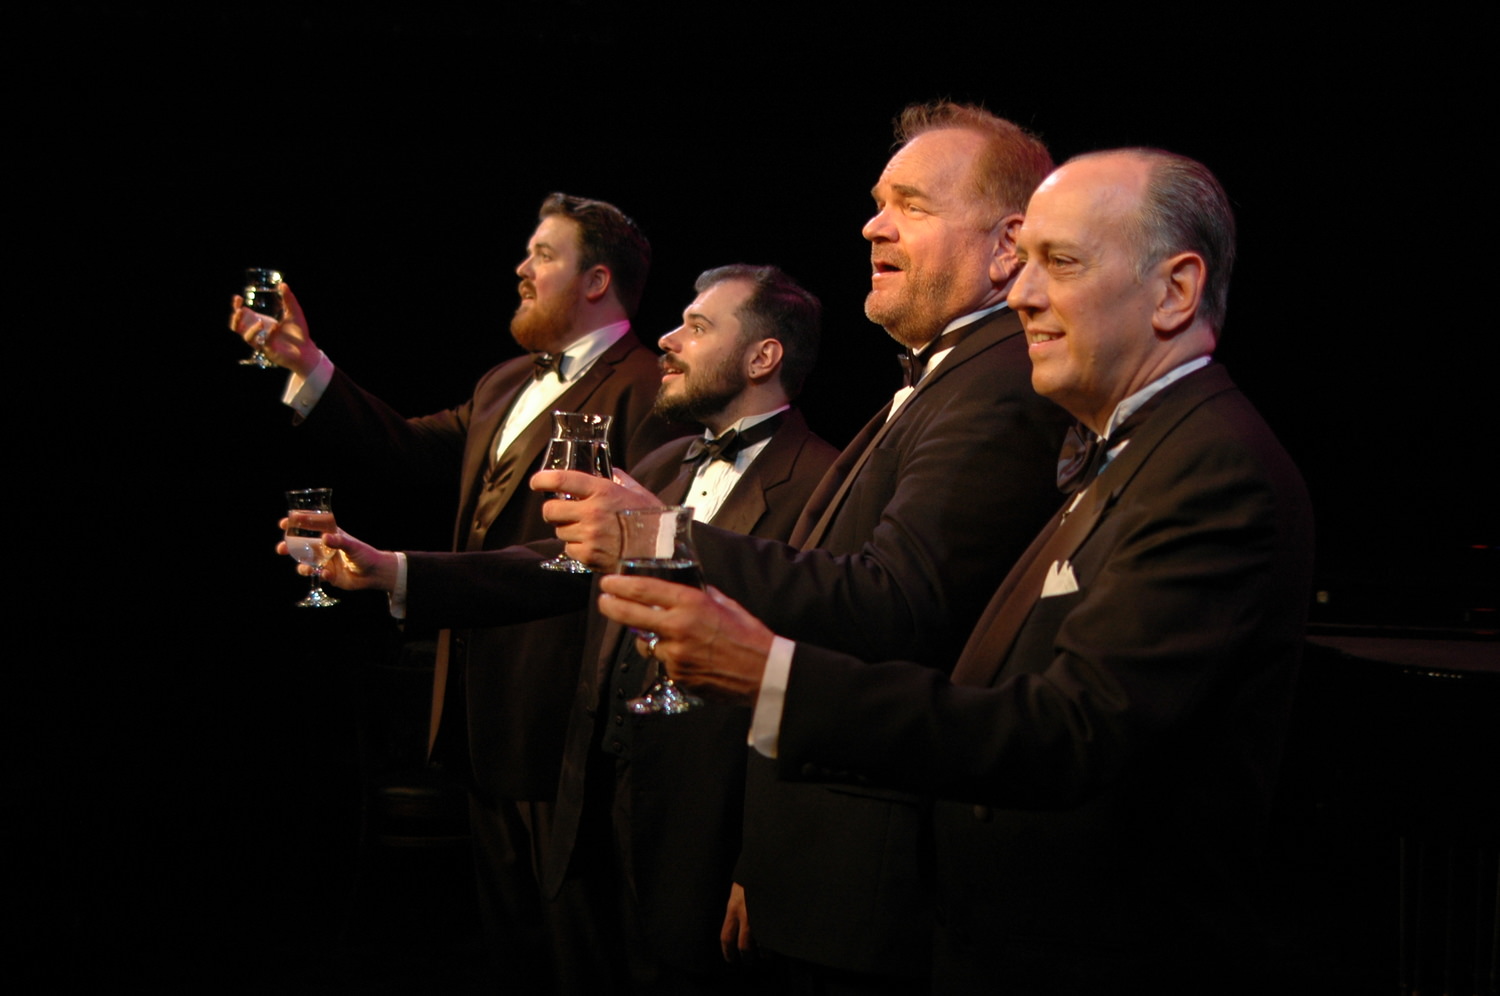 (l to r) Philip Himebook, Charles McGowan, Chuck Hodges and Joe Lackie in 3 Memphis Tenors and a Baritone in the Next Stage at Theatre Memphis July 7 - 23, 2017.